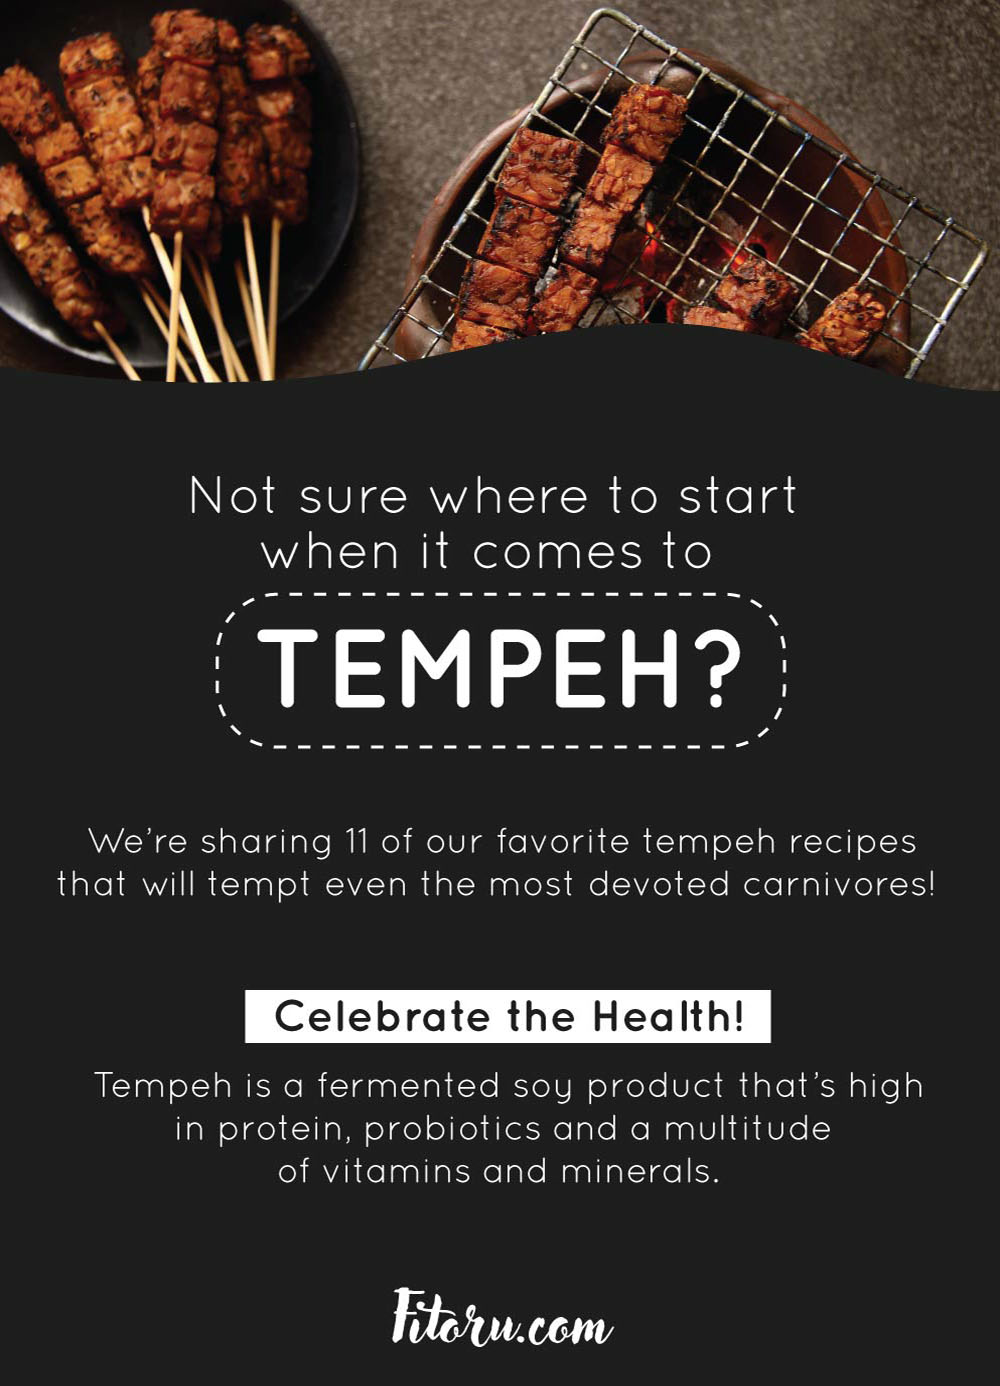 Not sure where to start when it comes to tempeh?